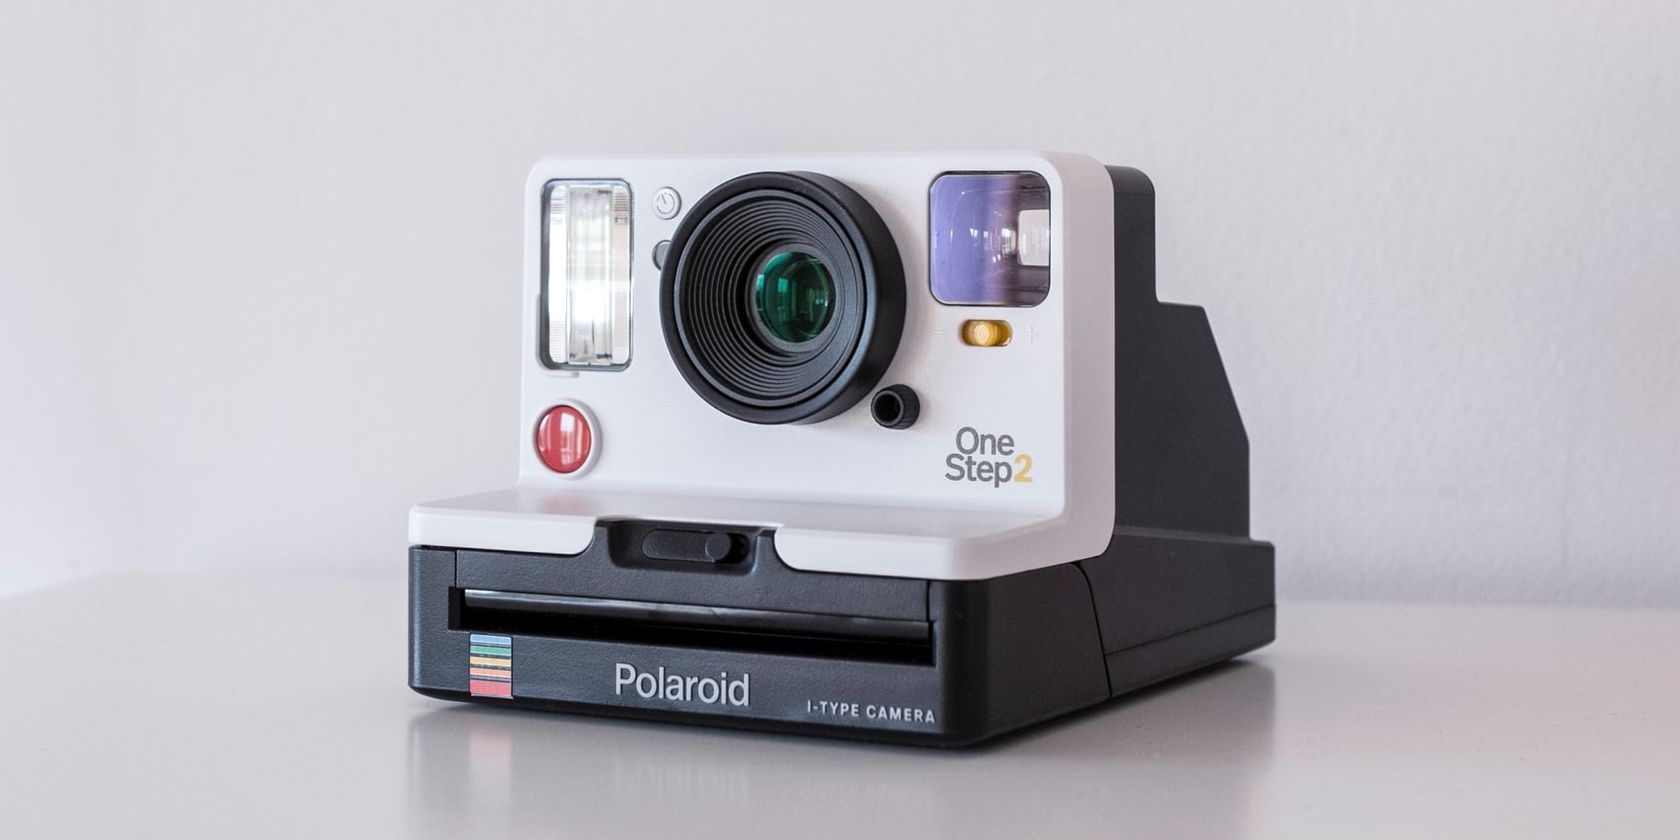 7 Things to Consider When Buying an Instant Camera